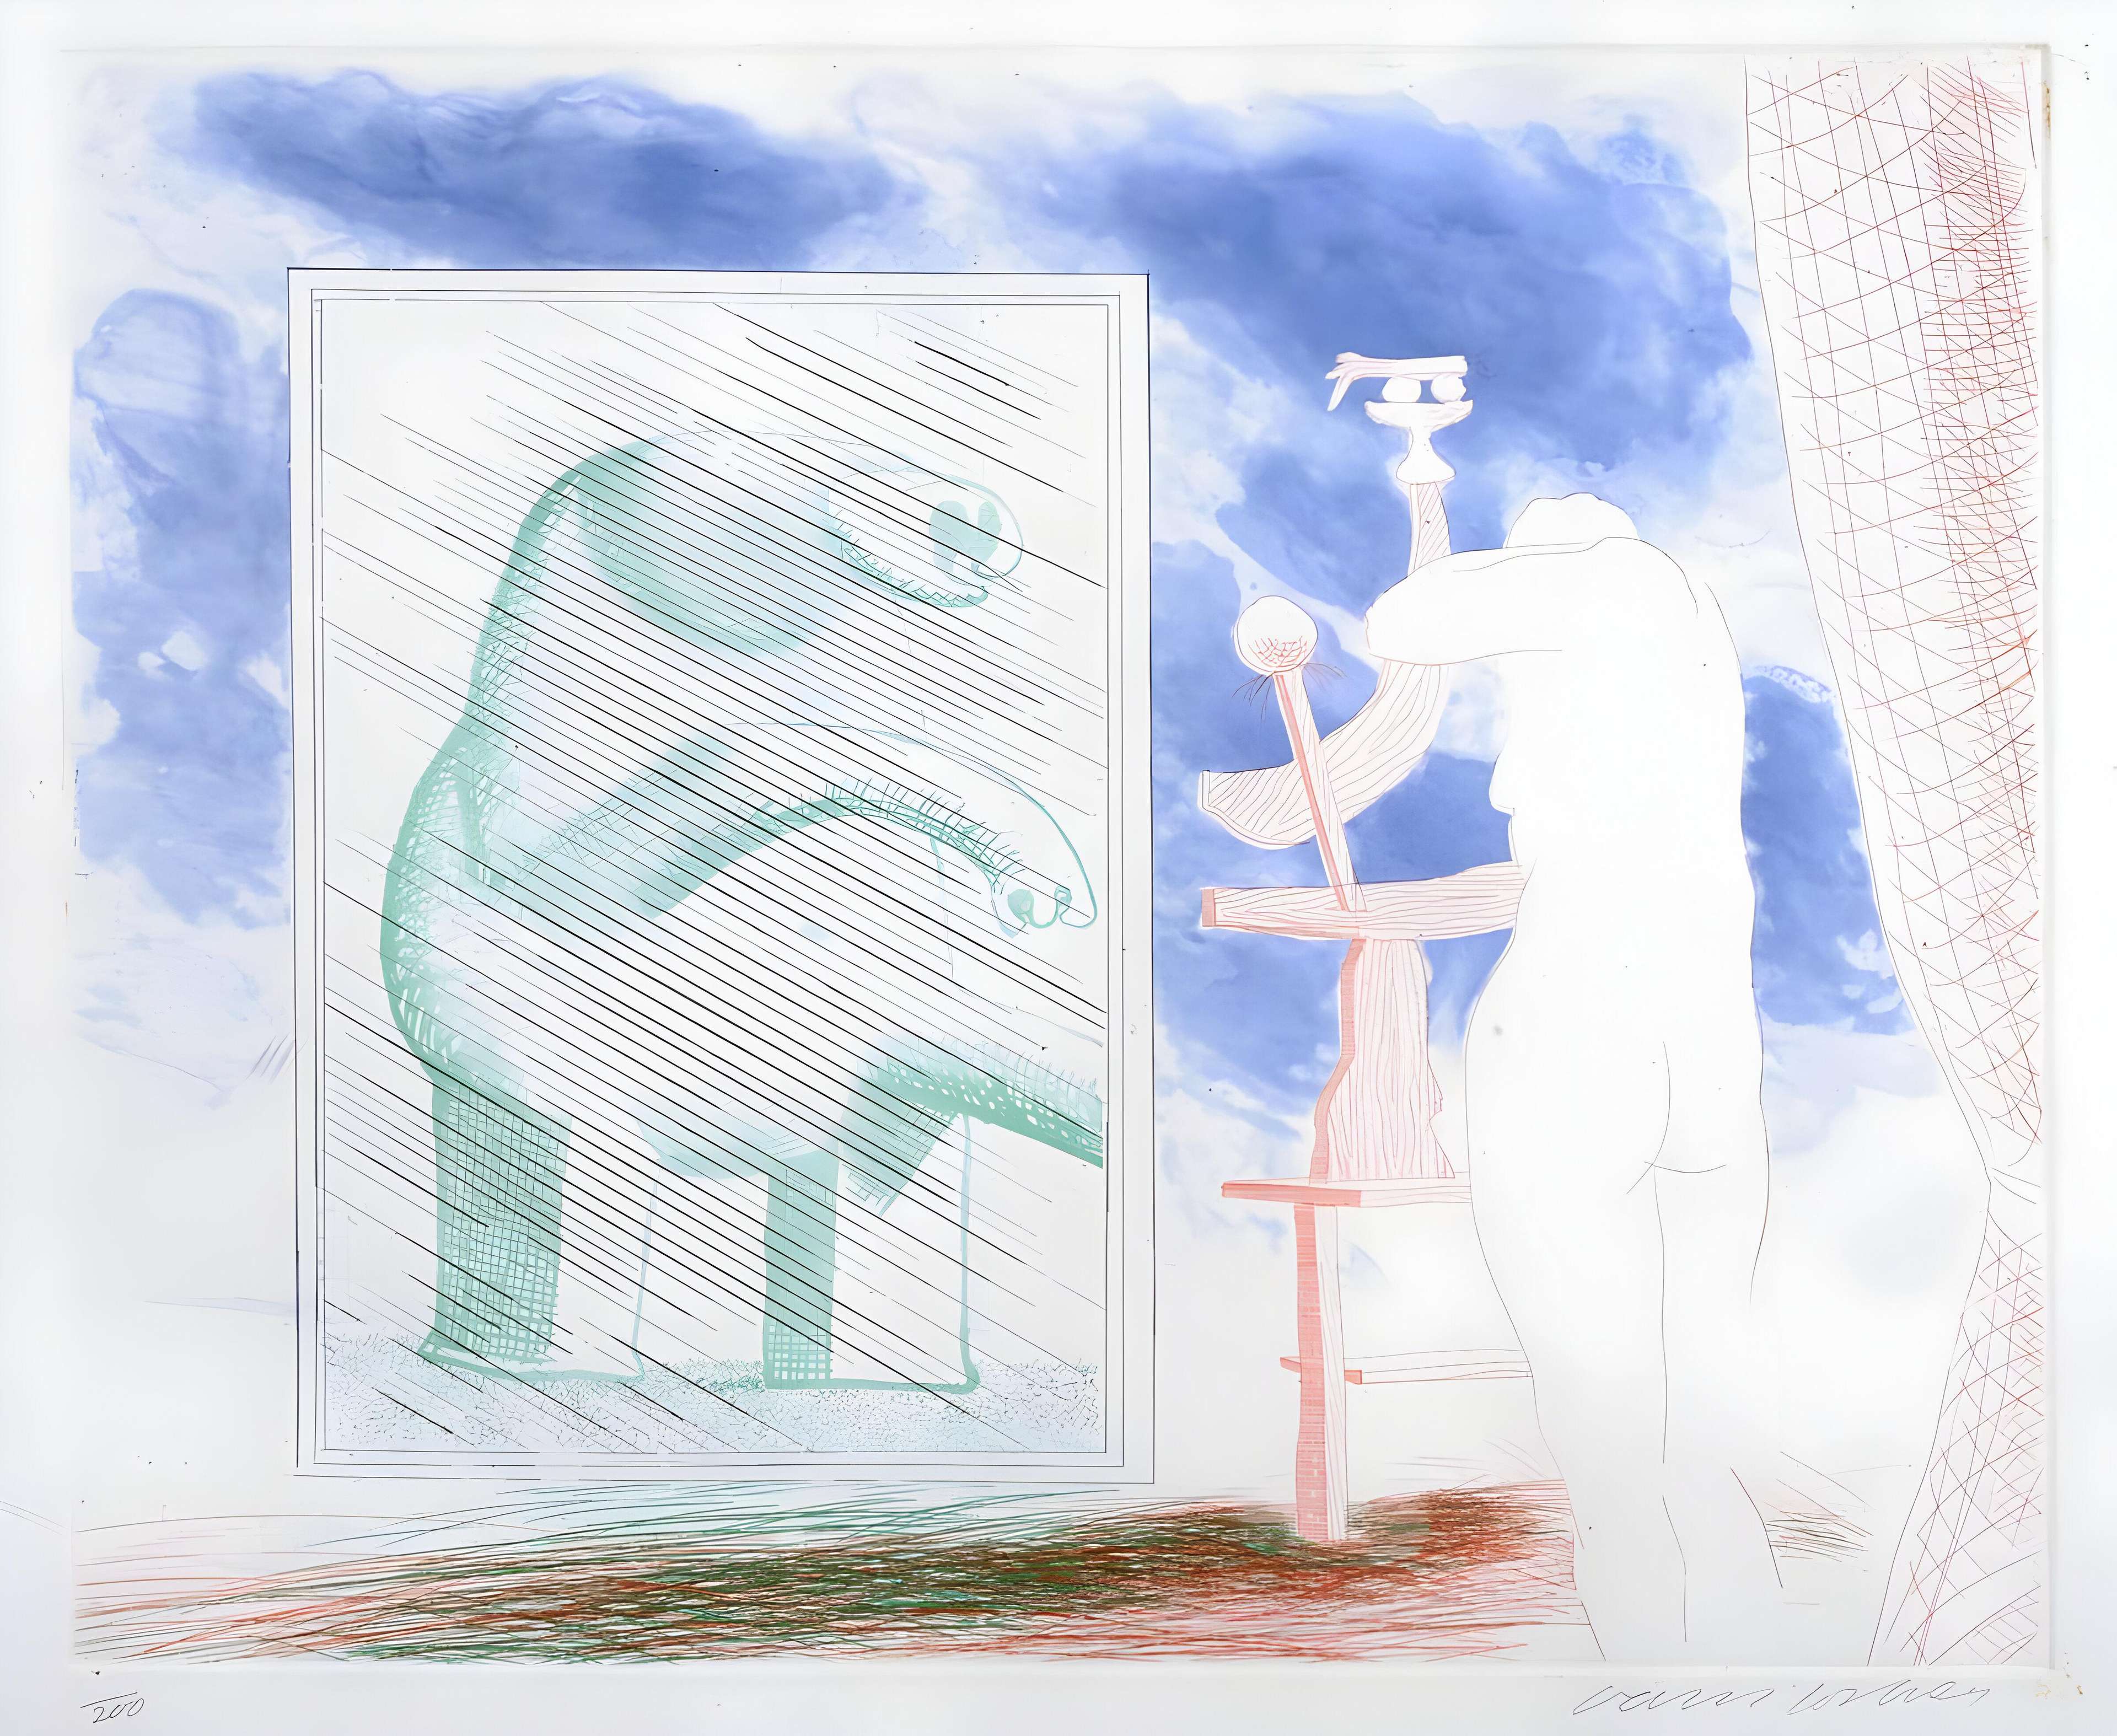 David Hockney’s A Picture Of Ourselves. An etching of a woman behind a curtain looking into a mirror with a green animal that resembles an elephant.